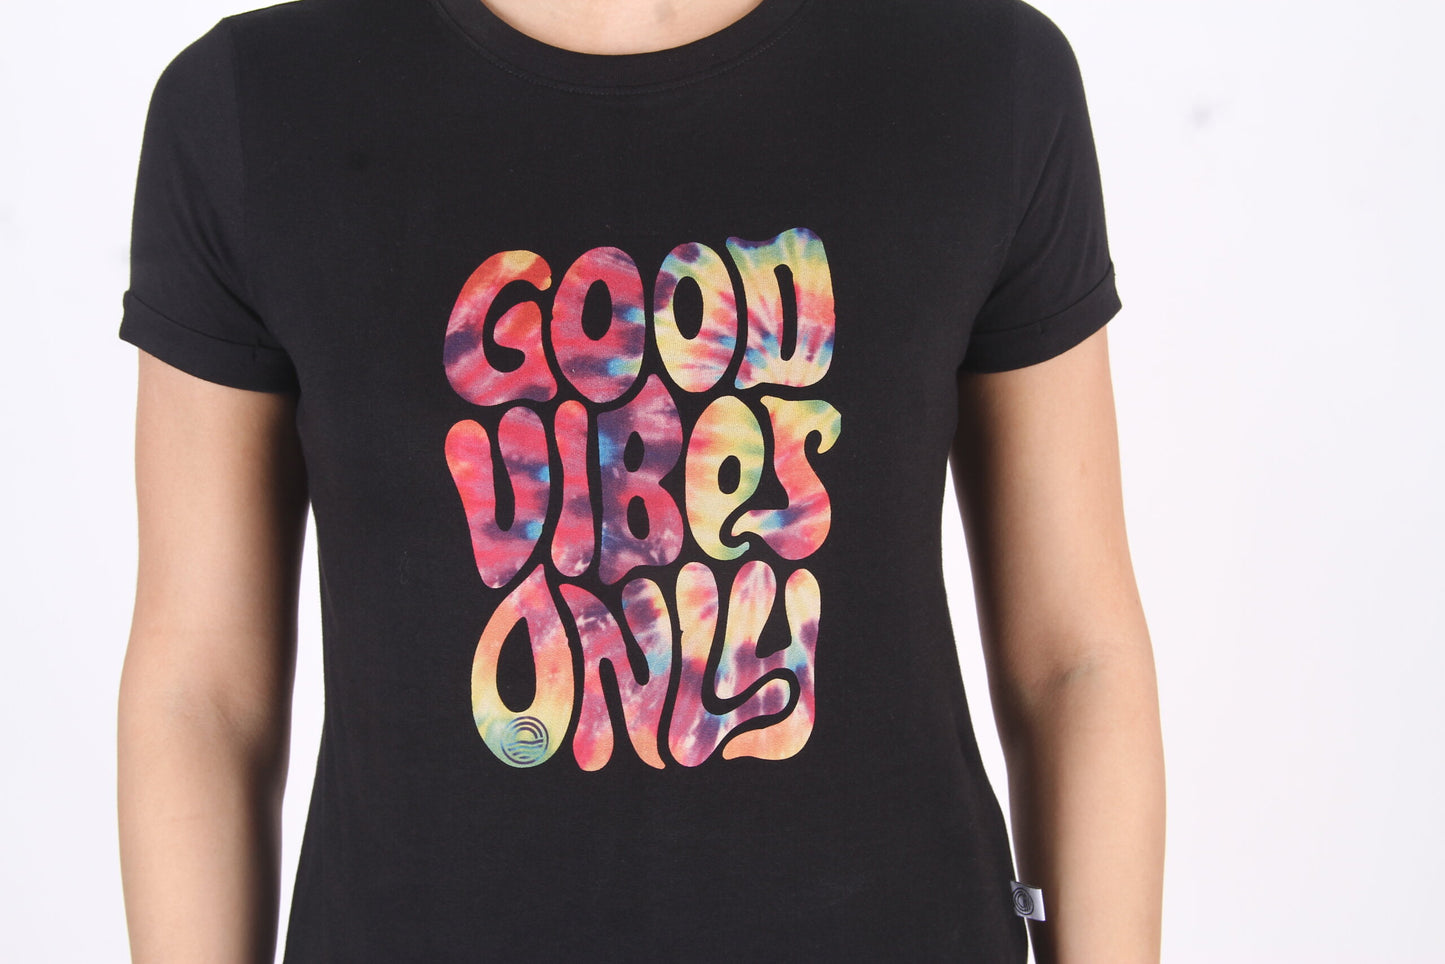 GOOD VIBES ONLY | PRINTED T-SHIRTS FOR WOMEN | WOMEN T-SHIRTS